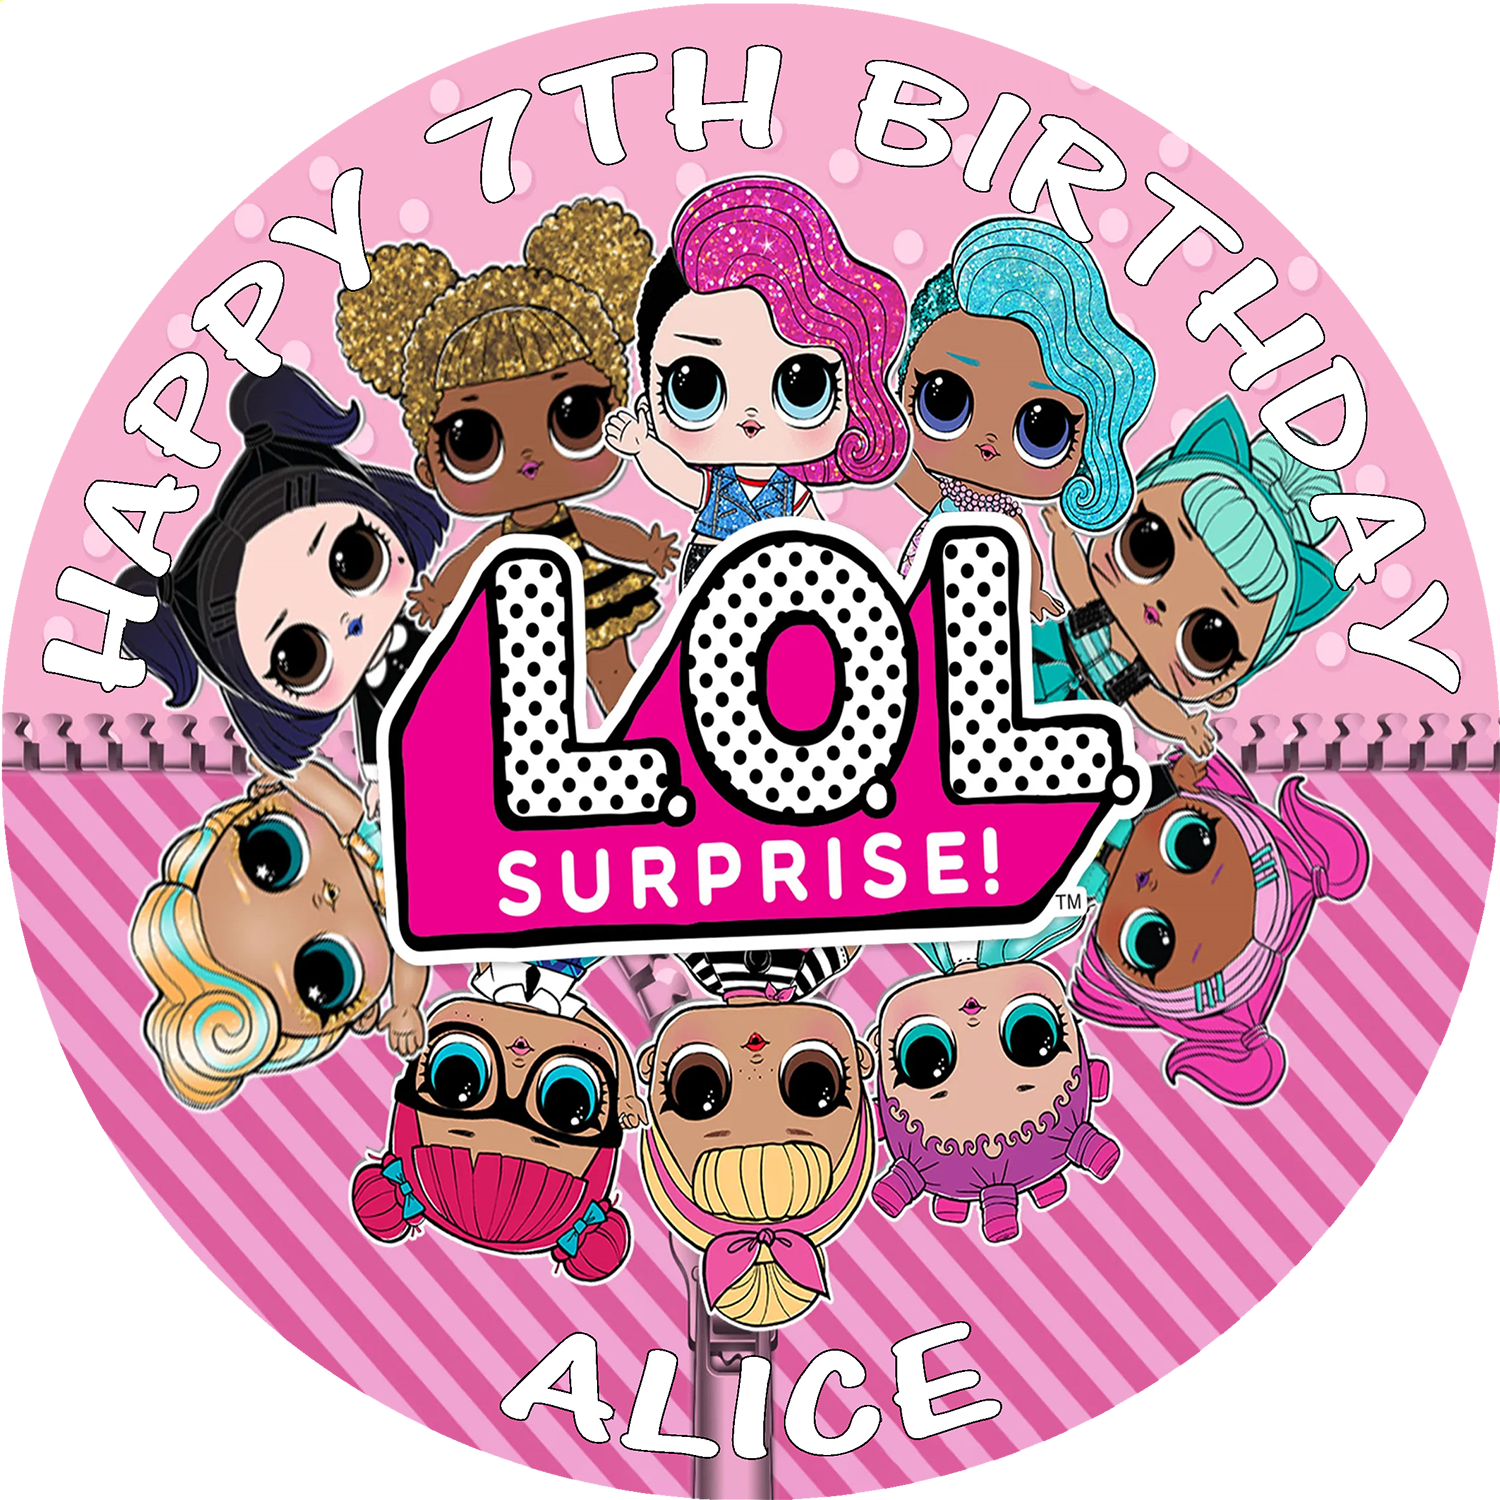 LOL Surprise Dolls EDIBLE Cake Topper or Cupcakes, LOL Surprise Dolls Cake,  LOL Surprise Dolls Cupcakes, LOL Cake | Edible Party Images